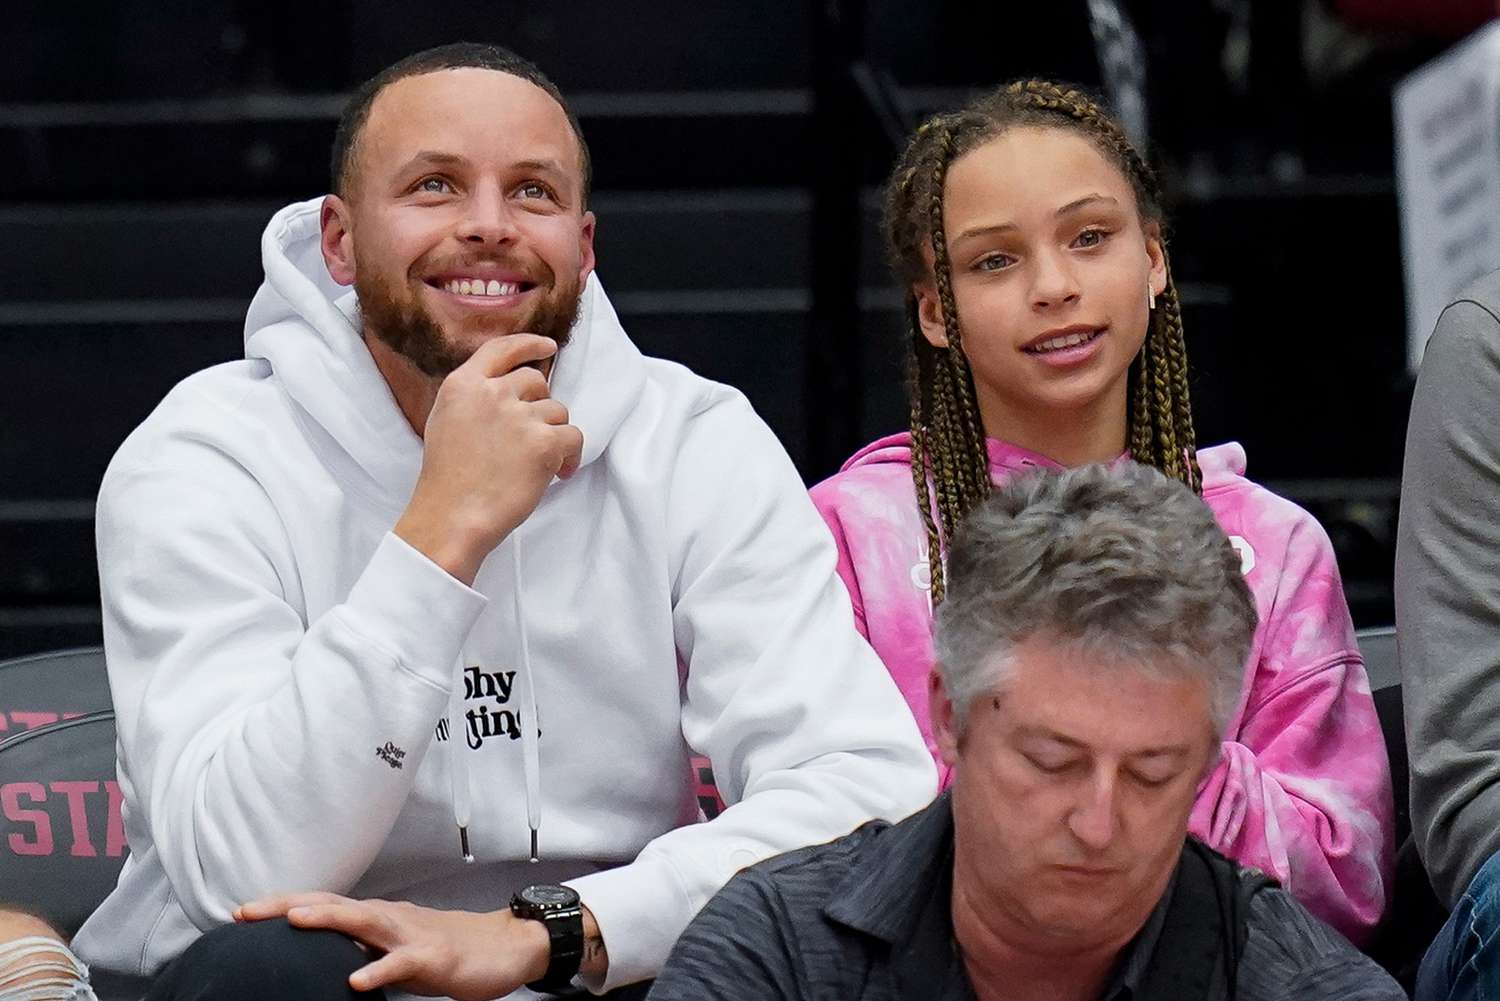 Stephen Curry daughter, Riley Curry